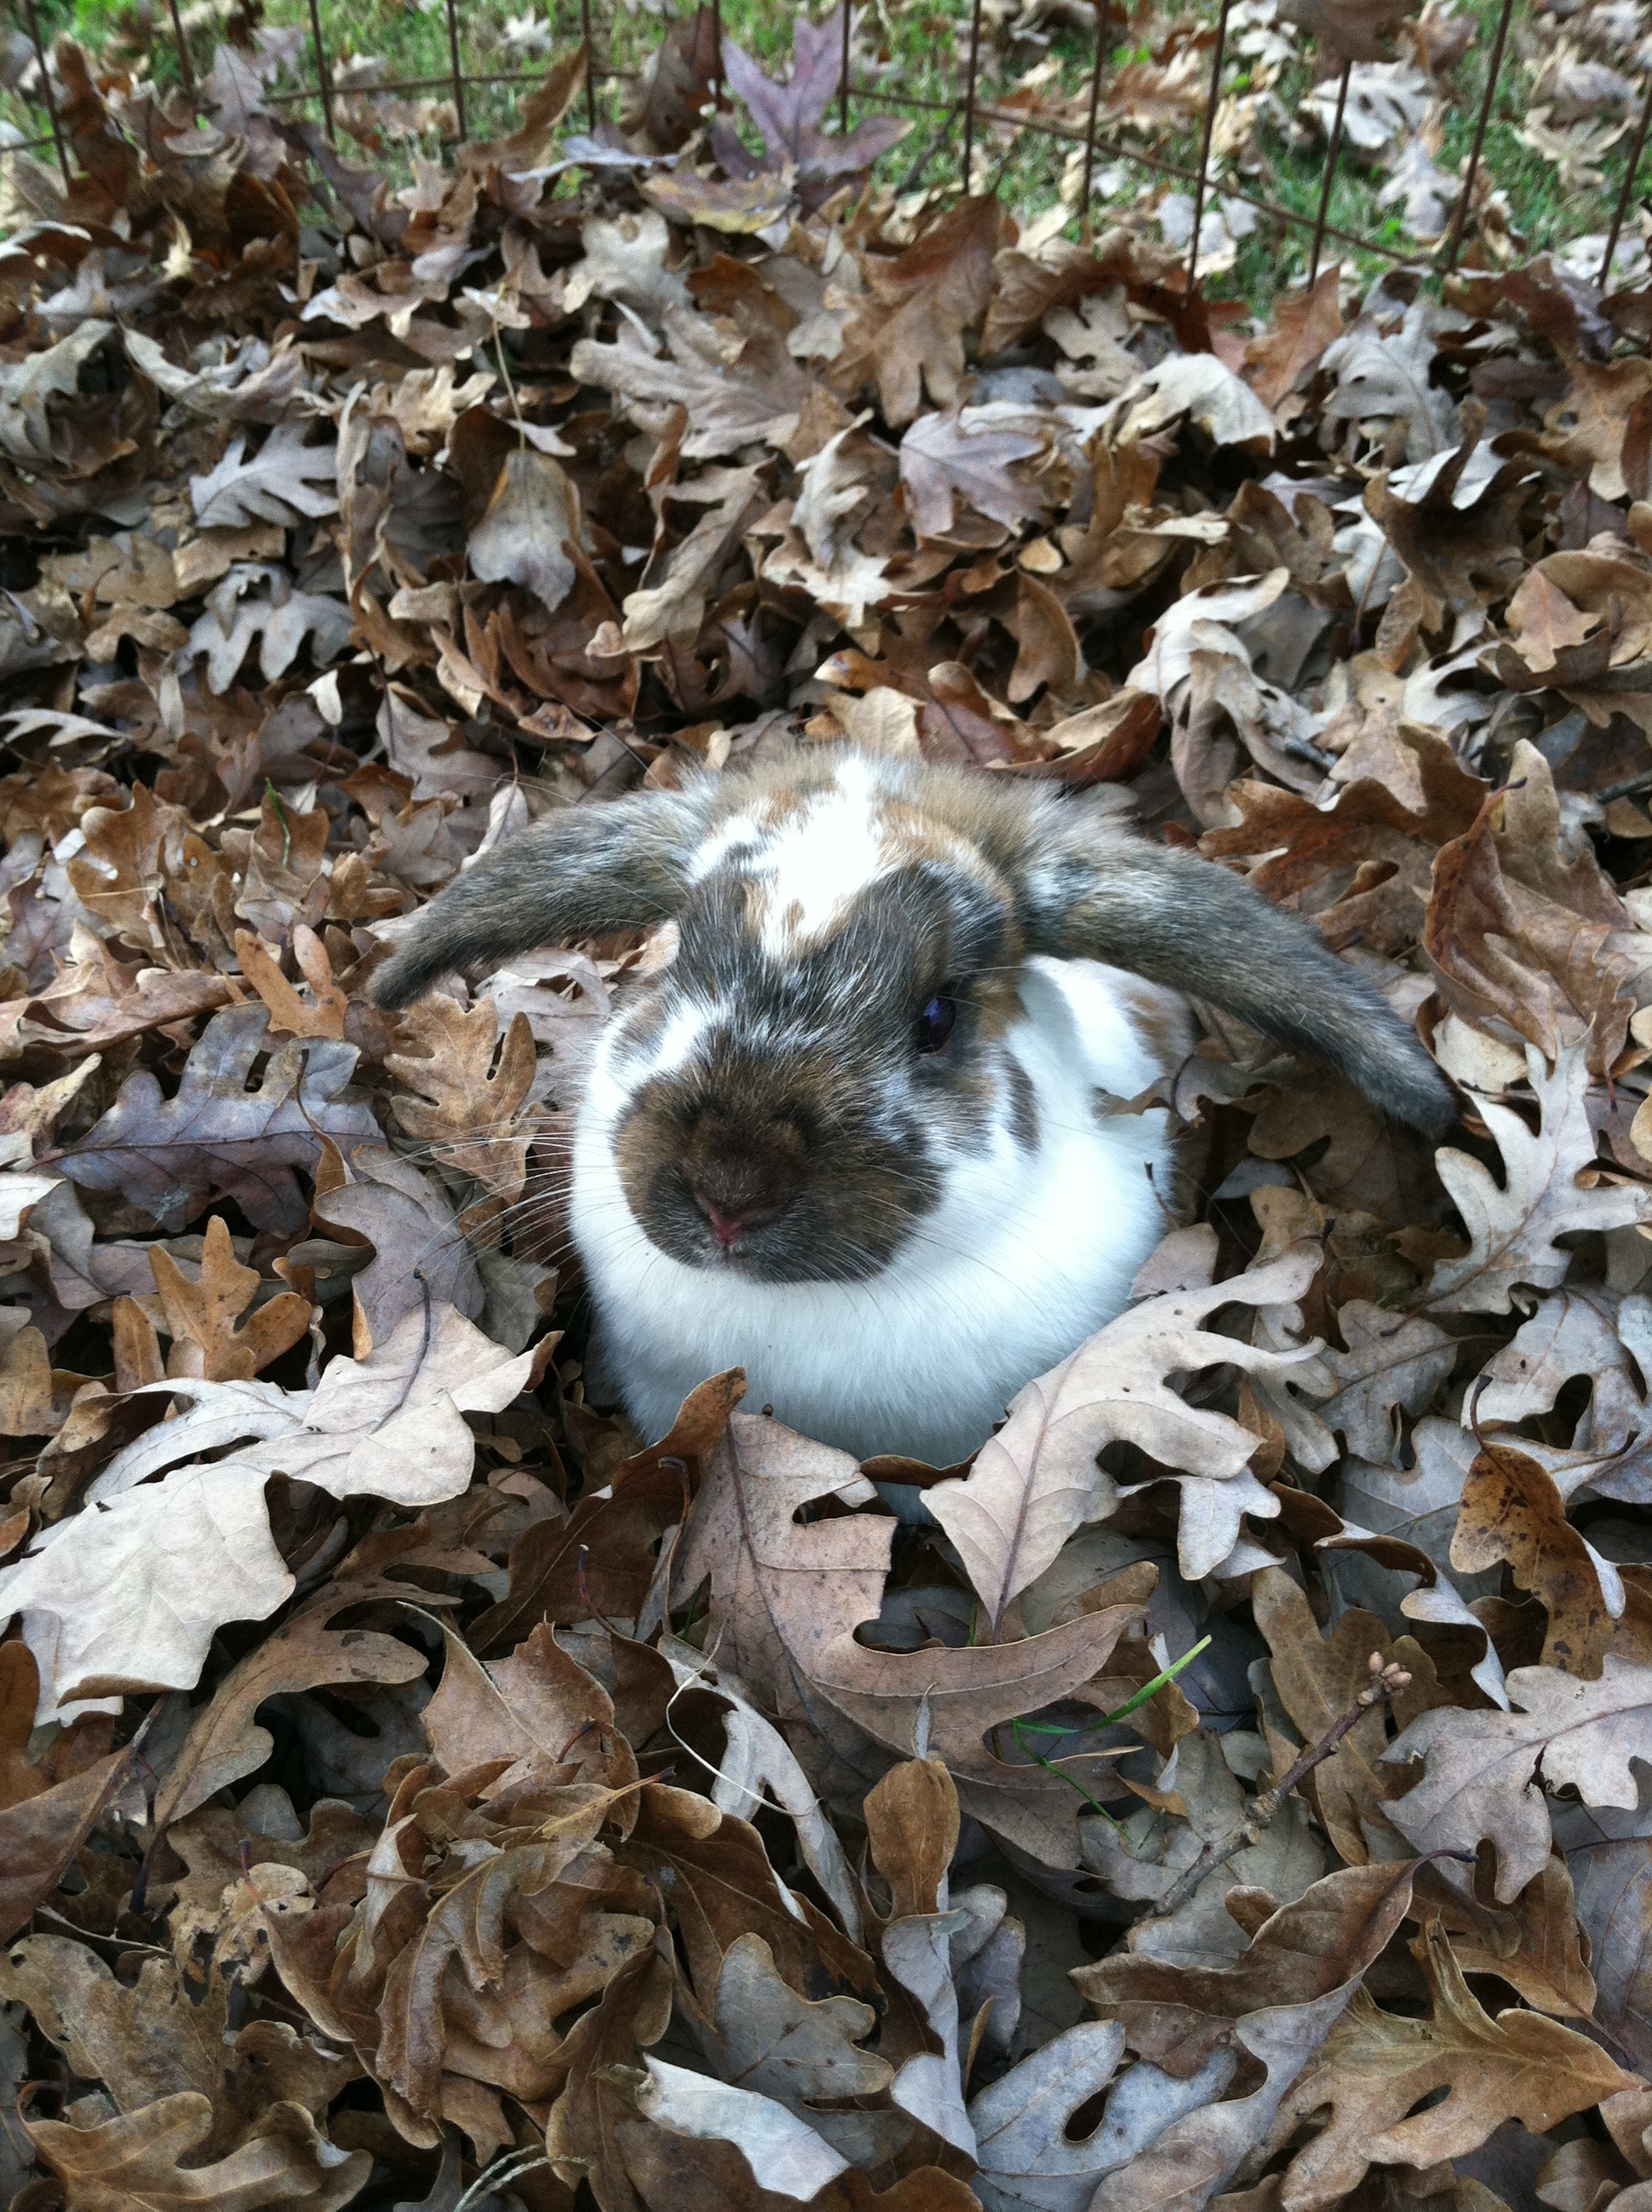 Bunny Plays in a Pile of Crunchy Leaves